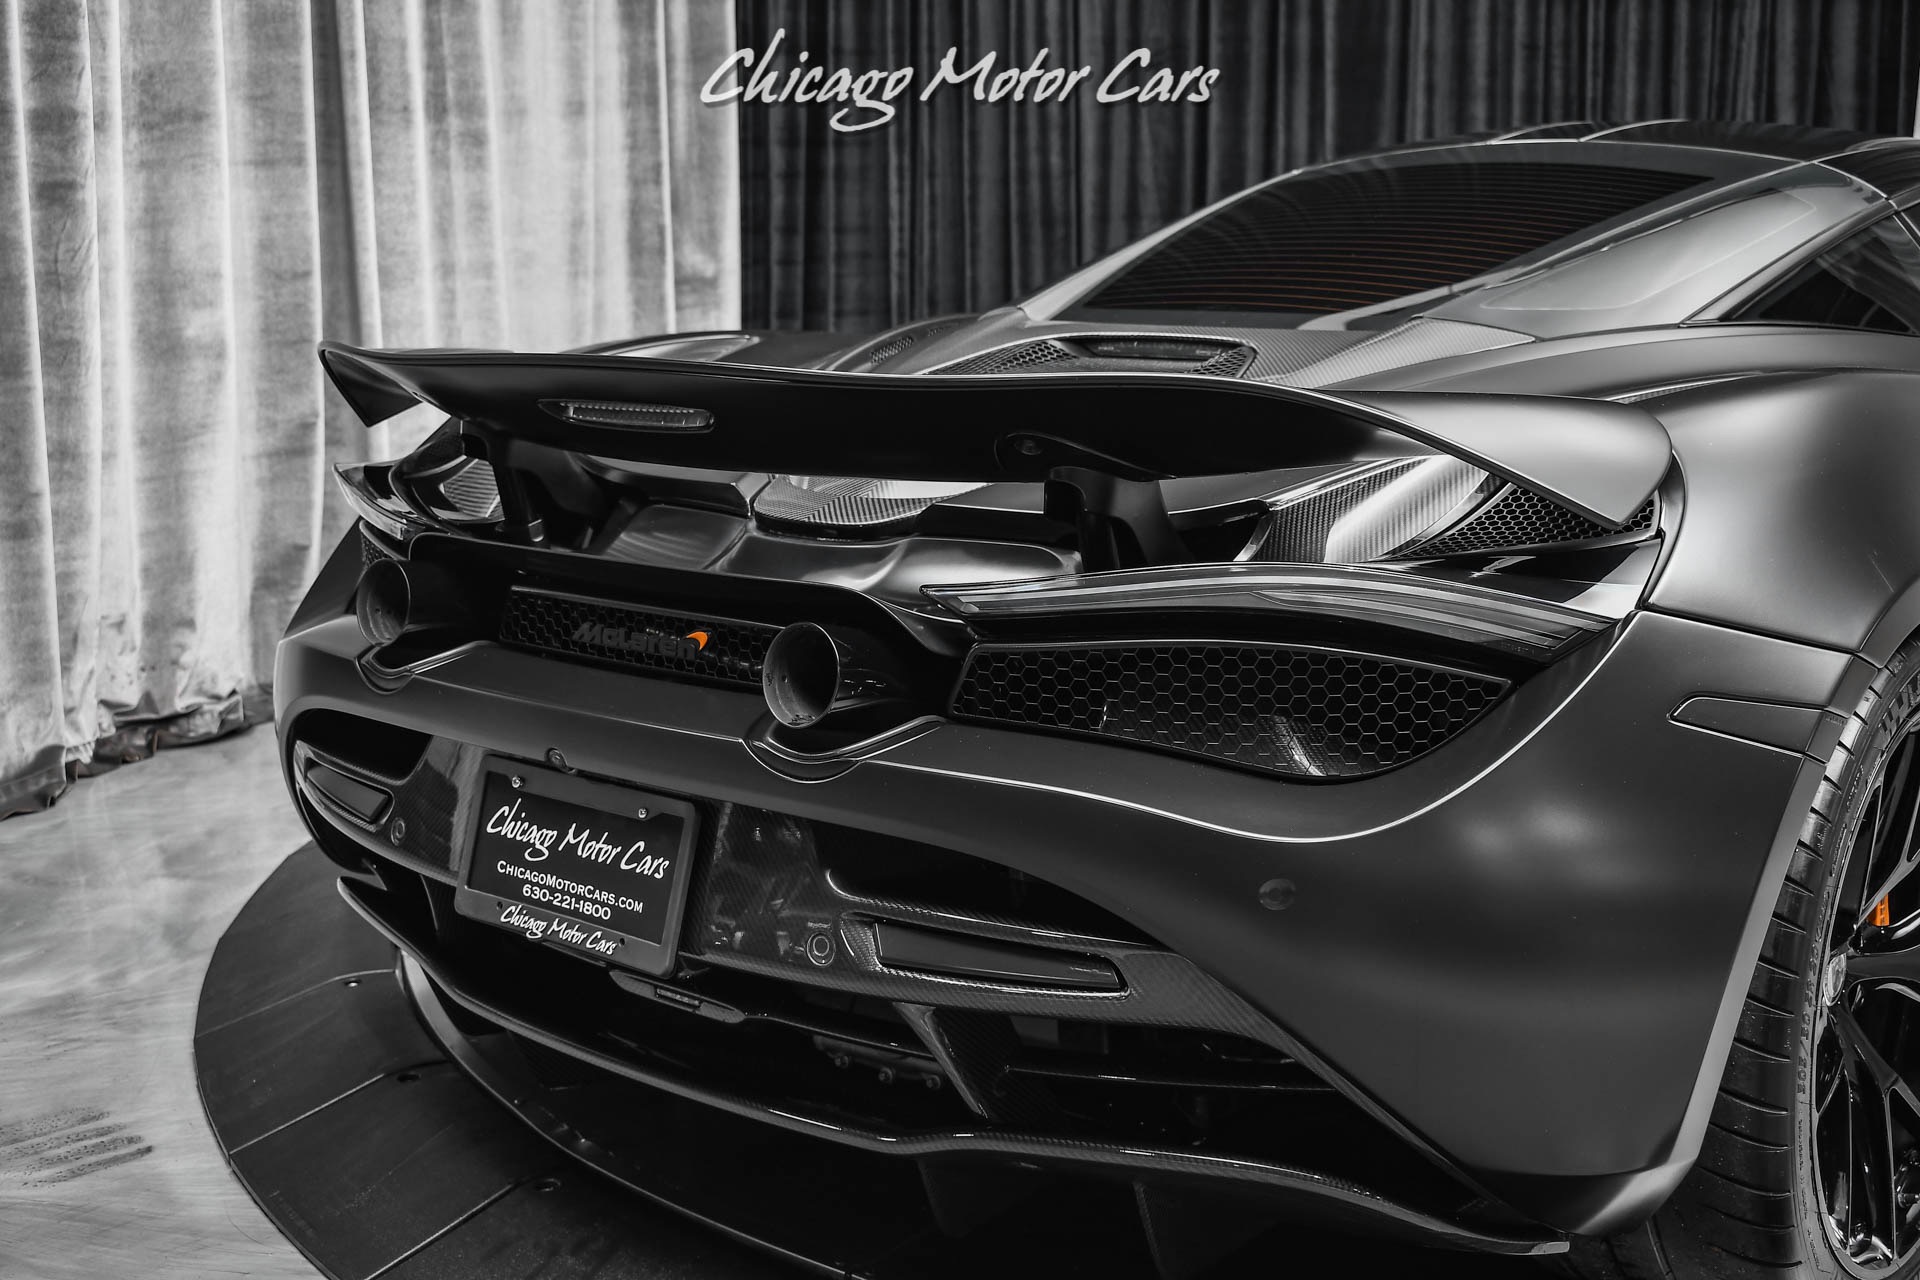 Used-2018-McLaren-720S-Performance-Coupe-Satin-Black-HRE-Wheels-TONS-of-Carbon-HUGE-MSRP